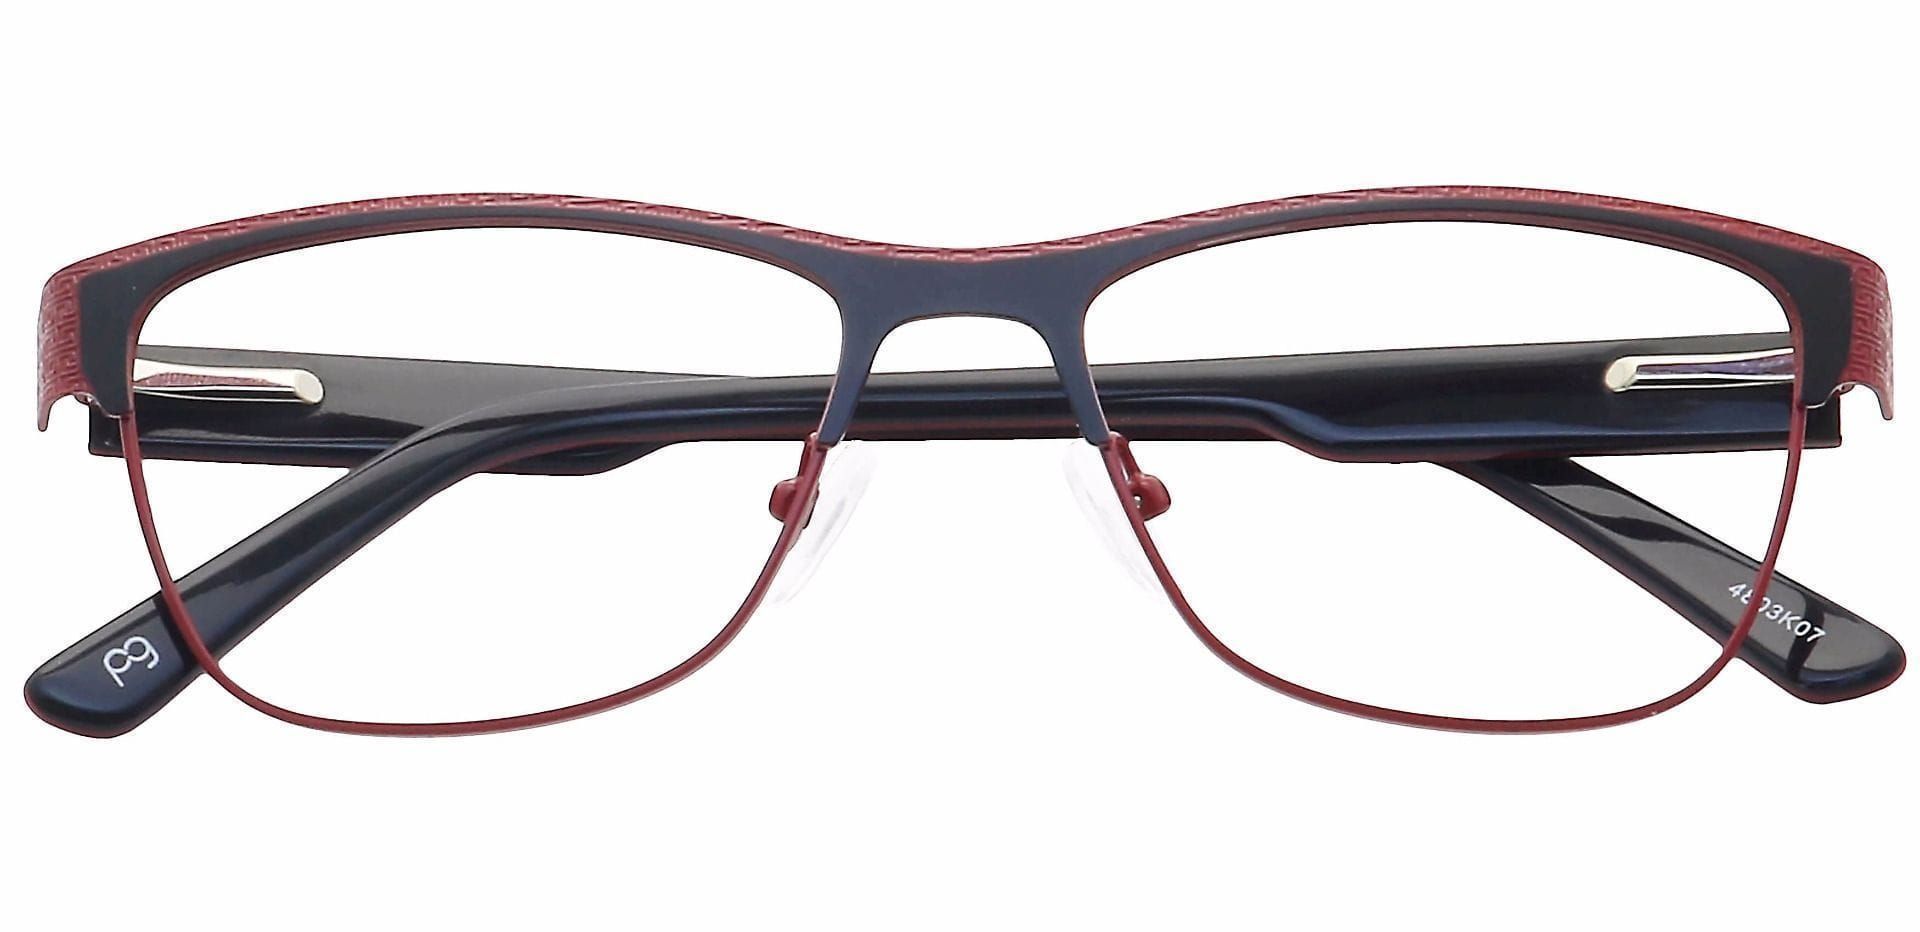 Ama Oval Reading Glasses - Red